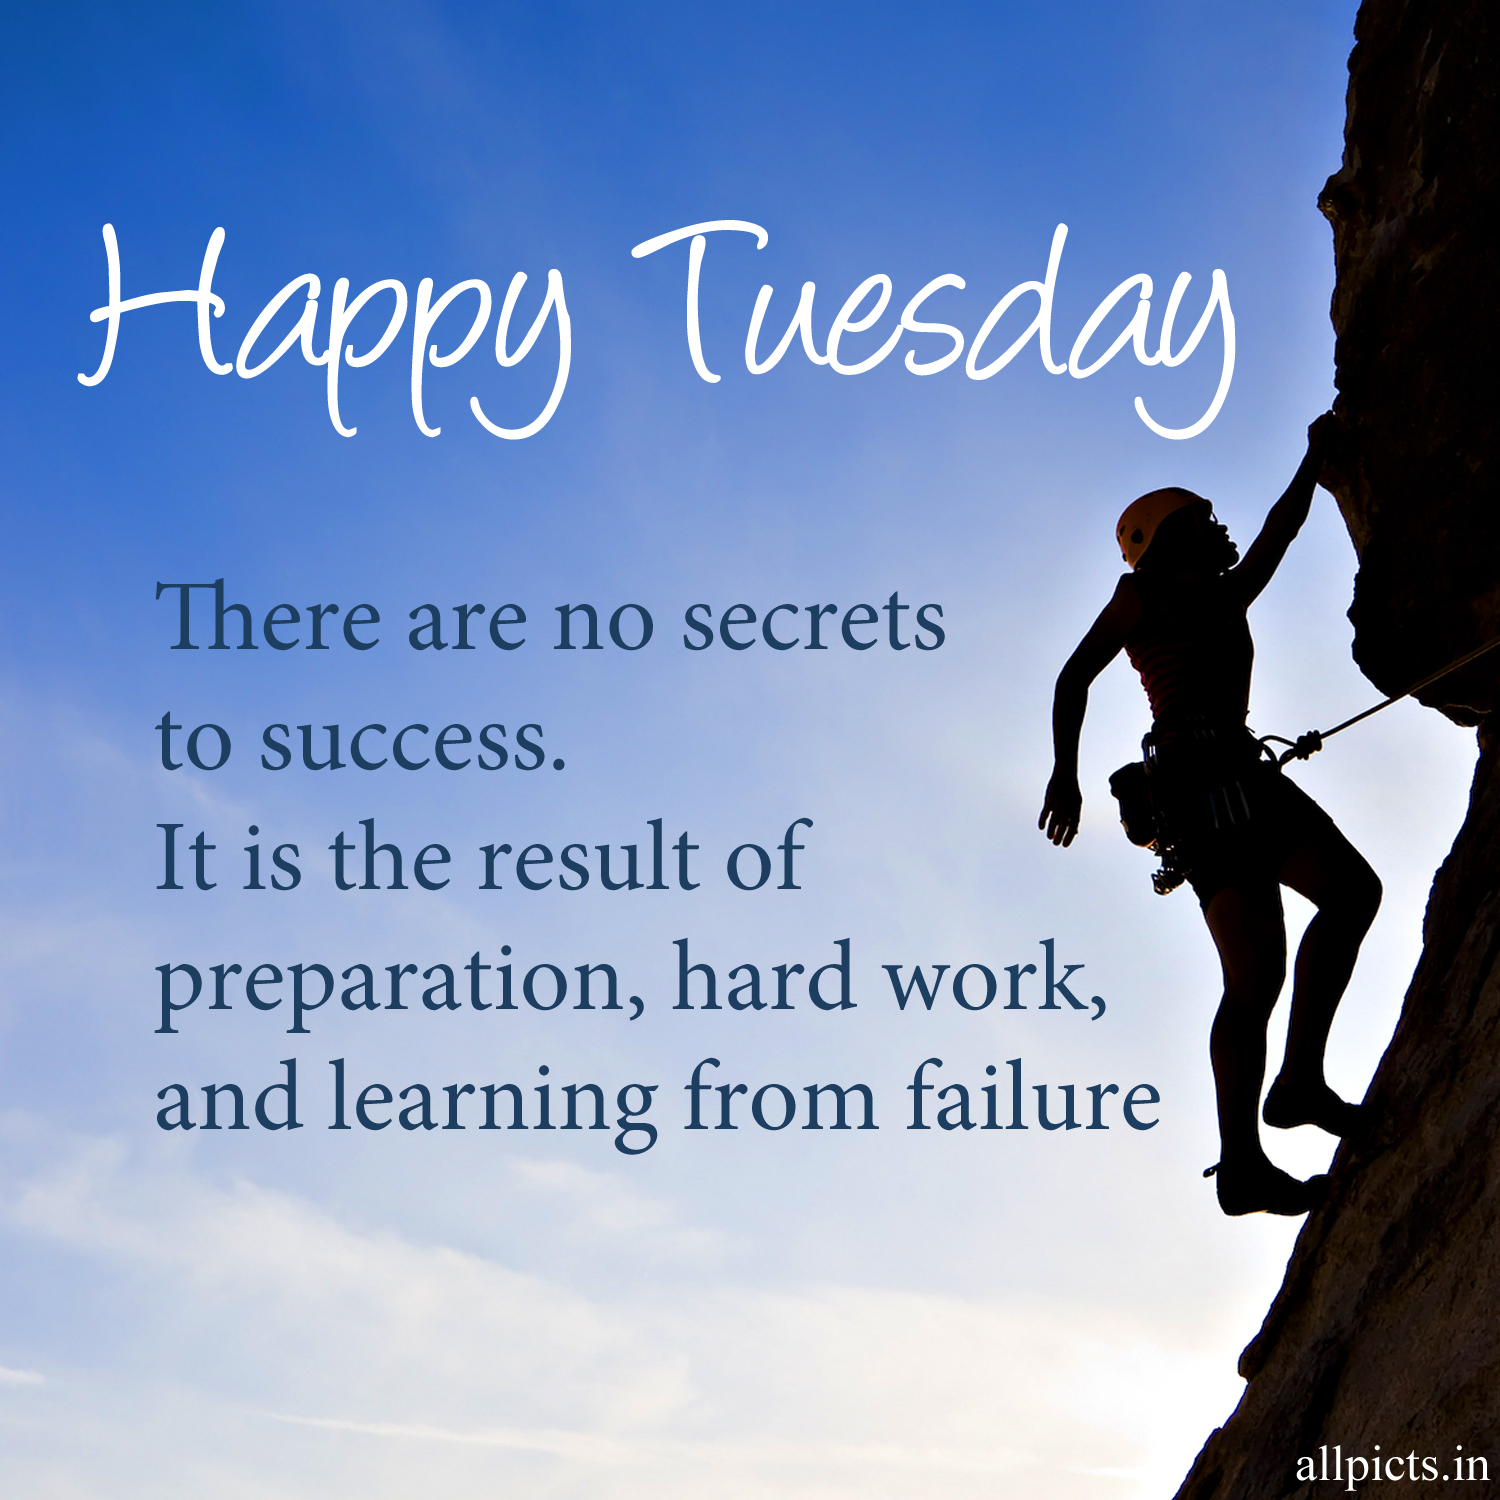 Tuesday Motivation: Quotes for Work to Keep You Going - Rainy Quote